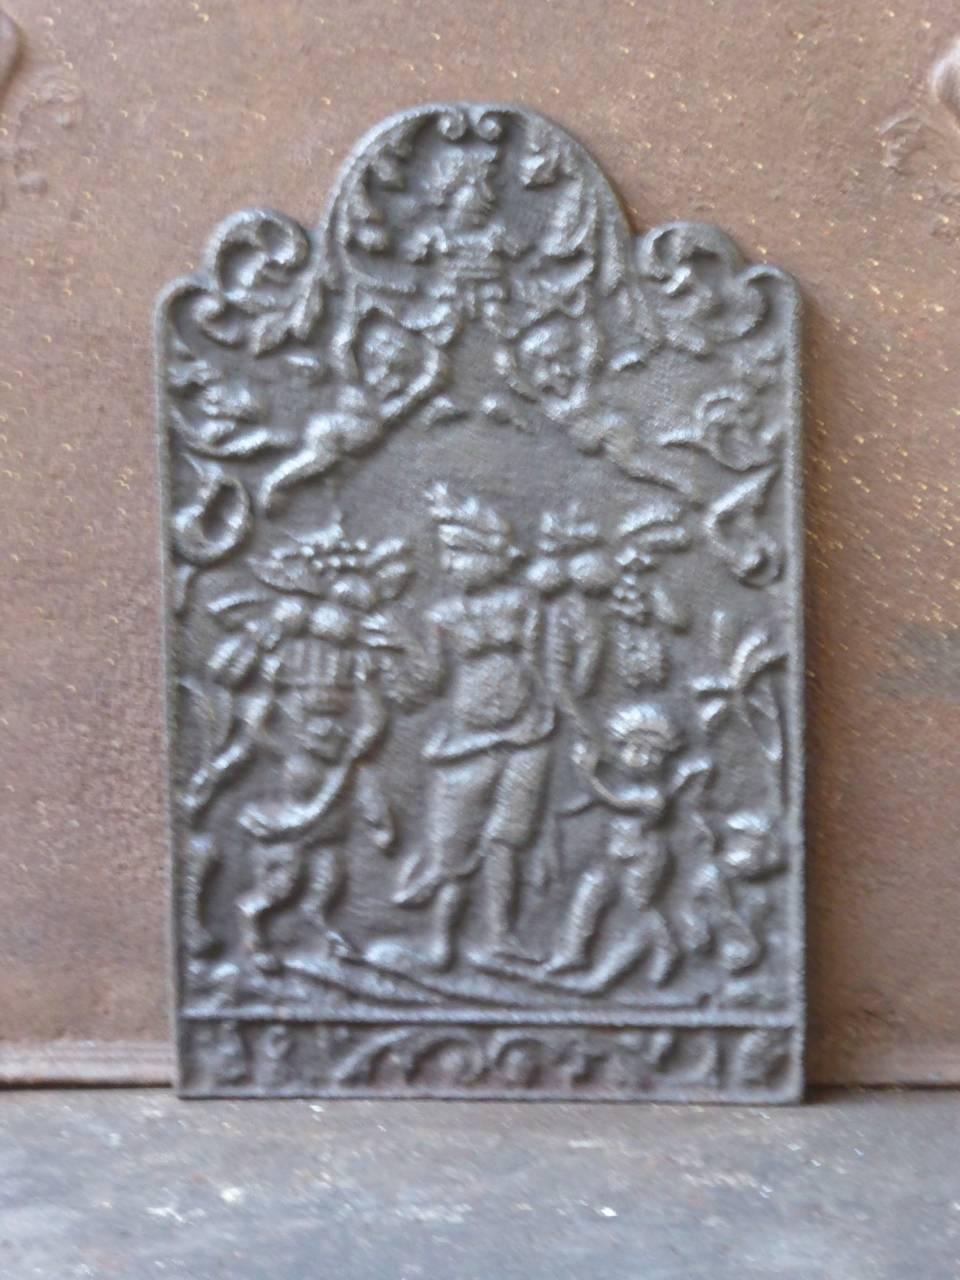 19th century English fireplace fireback with an allegory of Peace.

We have a unique and specialized collection of antique and used fireplace accessories consisting of more than 1000 listings at 1stdibs. Amongst others, we always have 300+